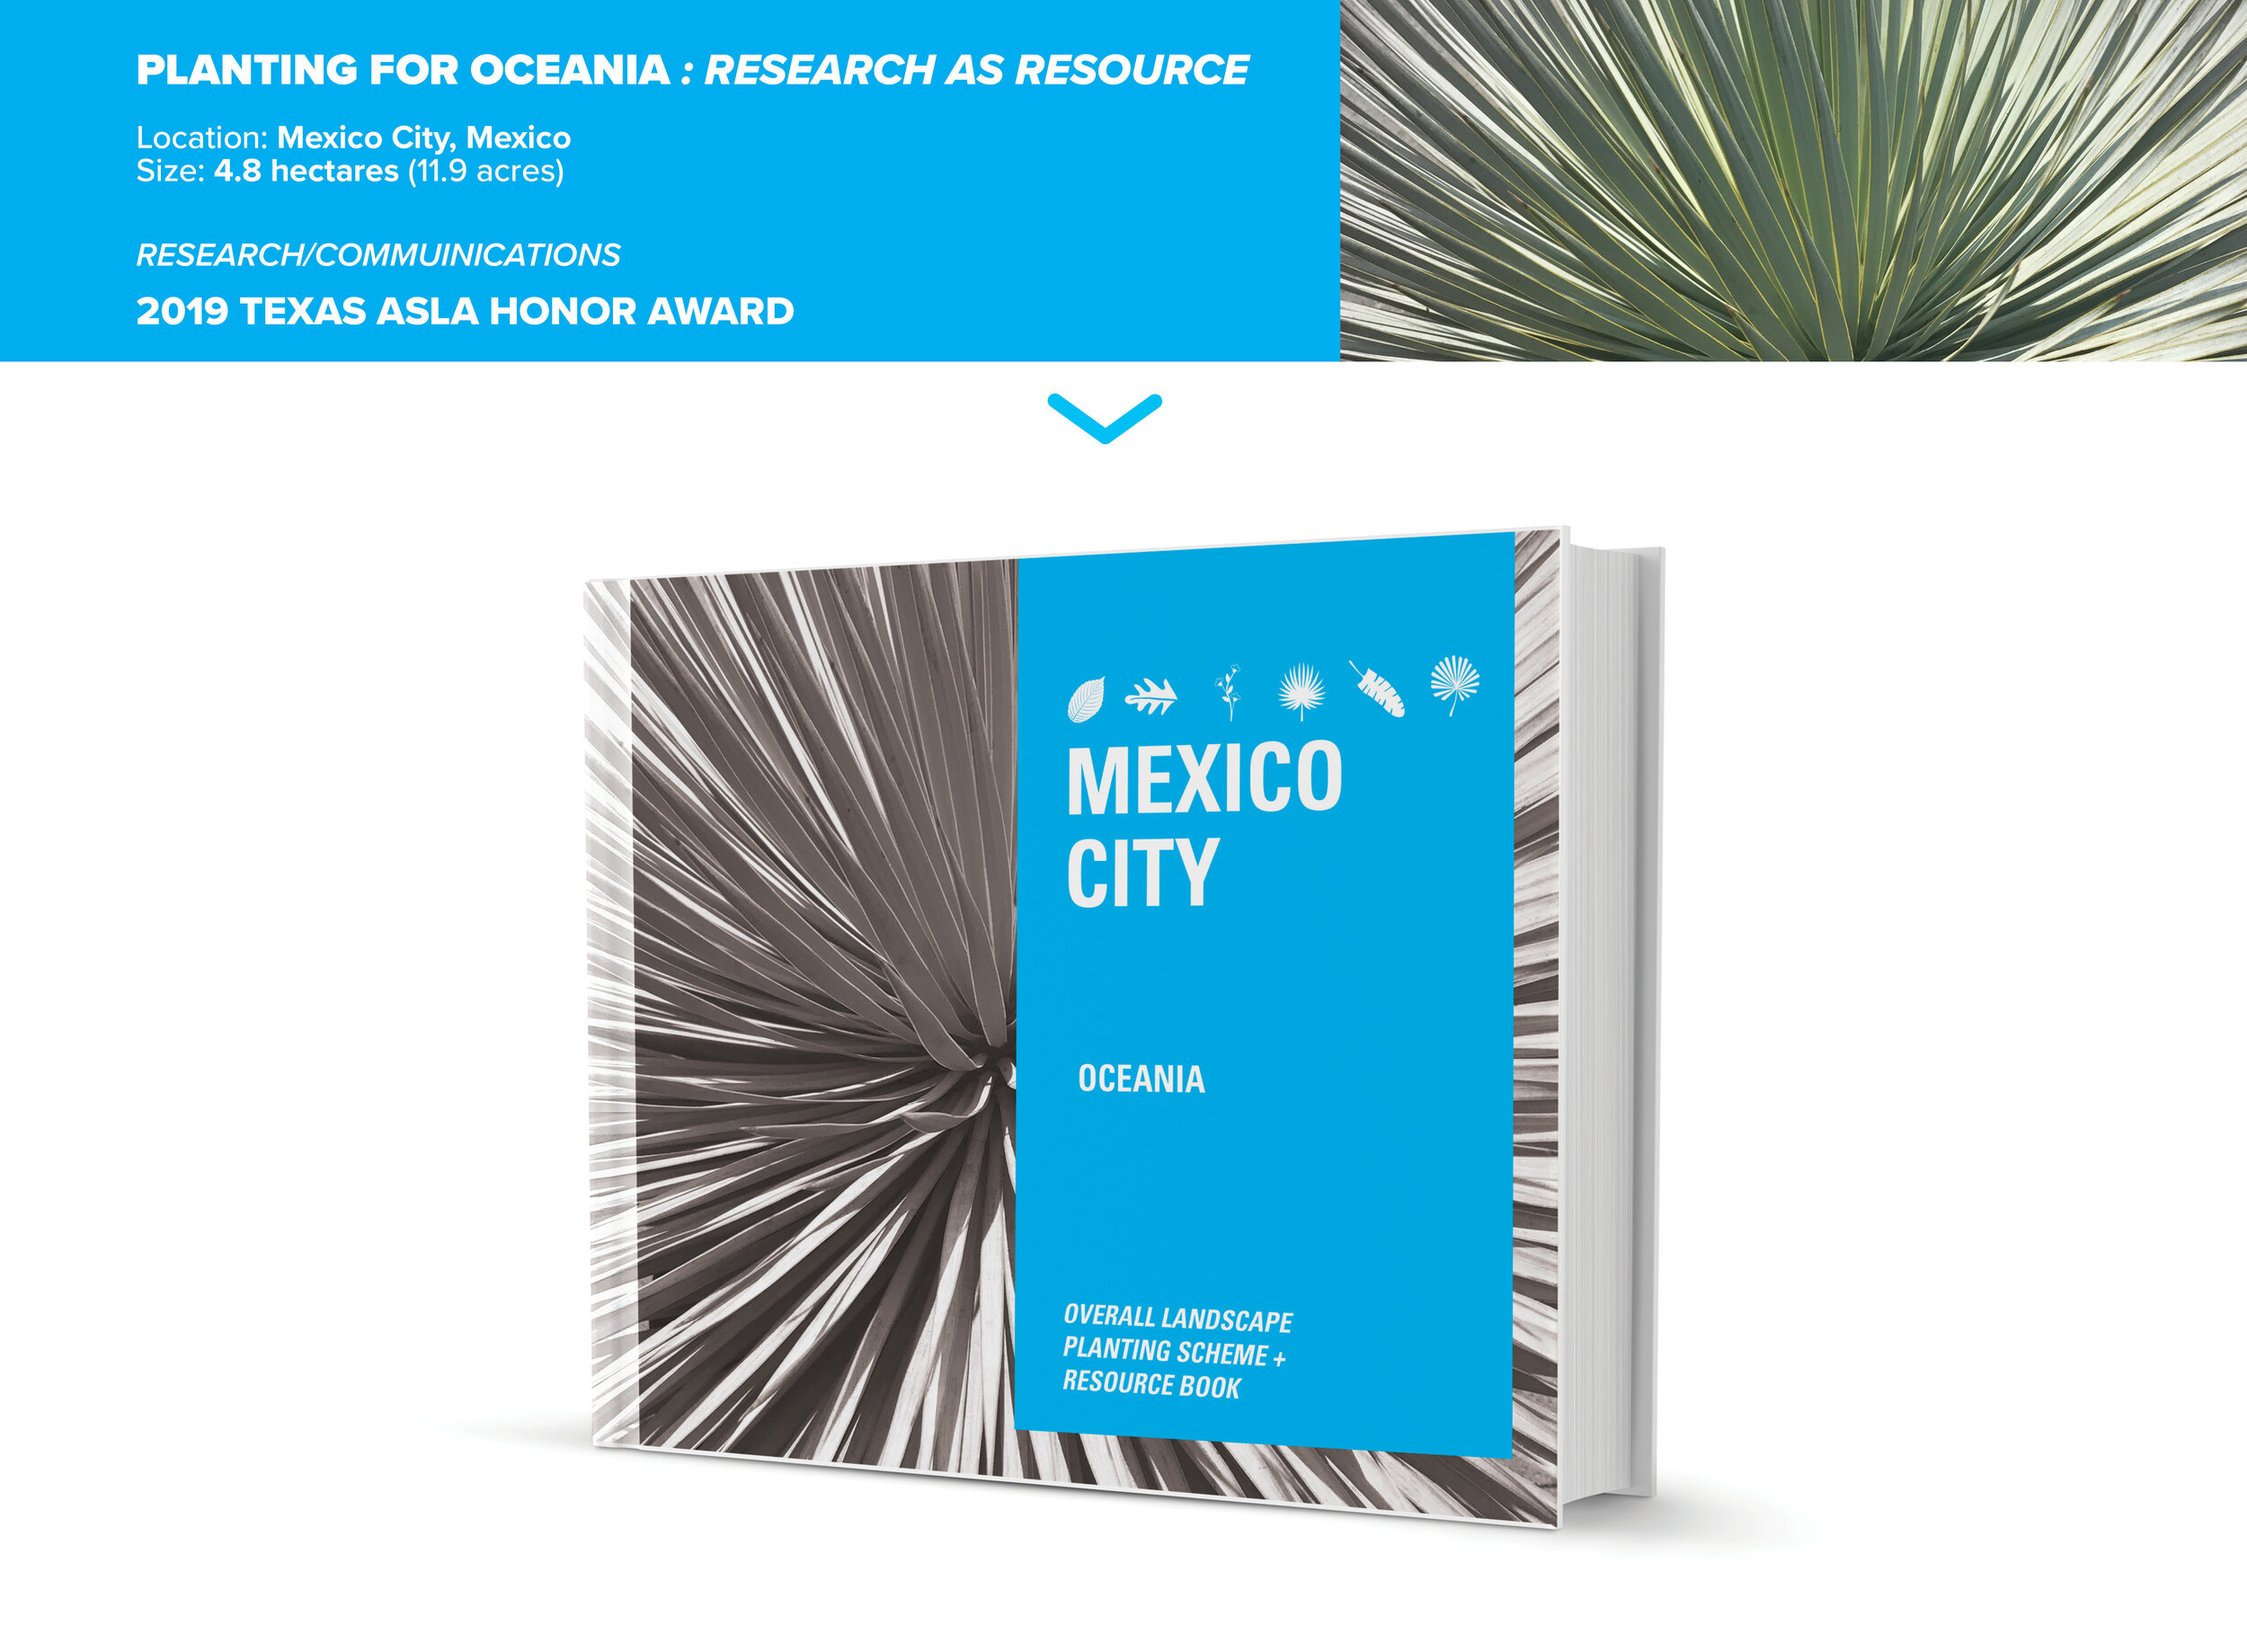  The Oceania plant book for Mexico City is a graphic communication piece to engage clients to help them understand comprehensively the project design as well as a tool for owners to be able to update the planting design of the retail spaces without u